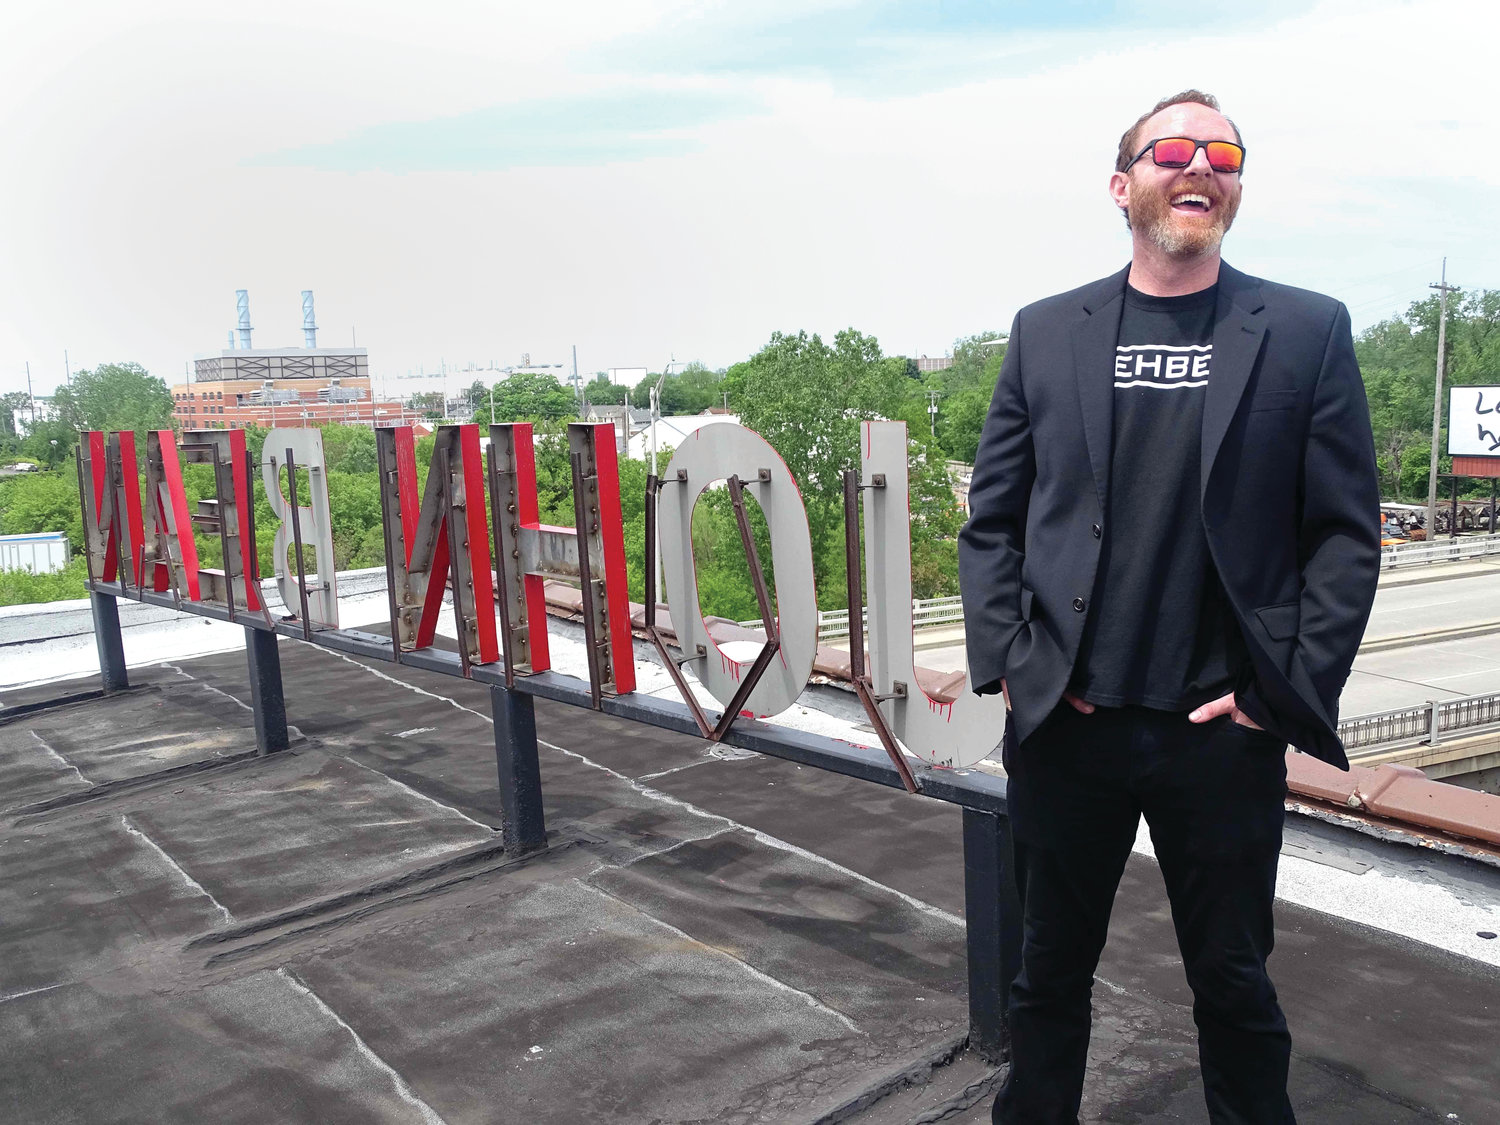 Michael Doherty, founder of Rehbel Industries, on the roof of the old John Bean Building, on South Cedar Street, which he is in the process of converting into one of the largest marijuana growing operations in the world.